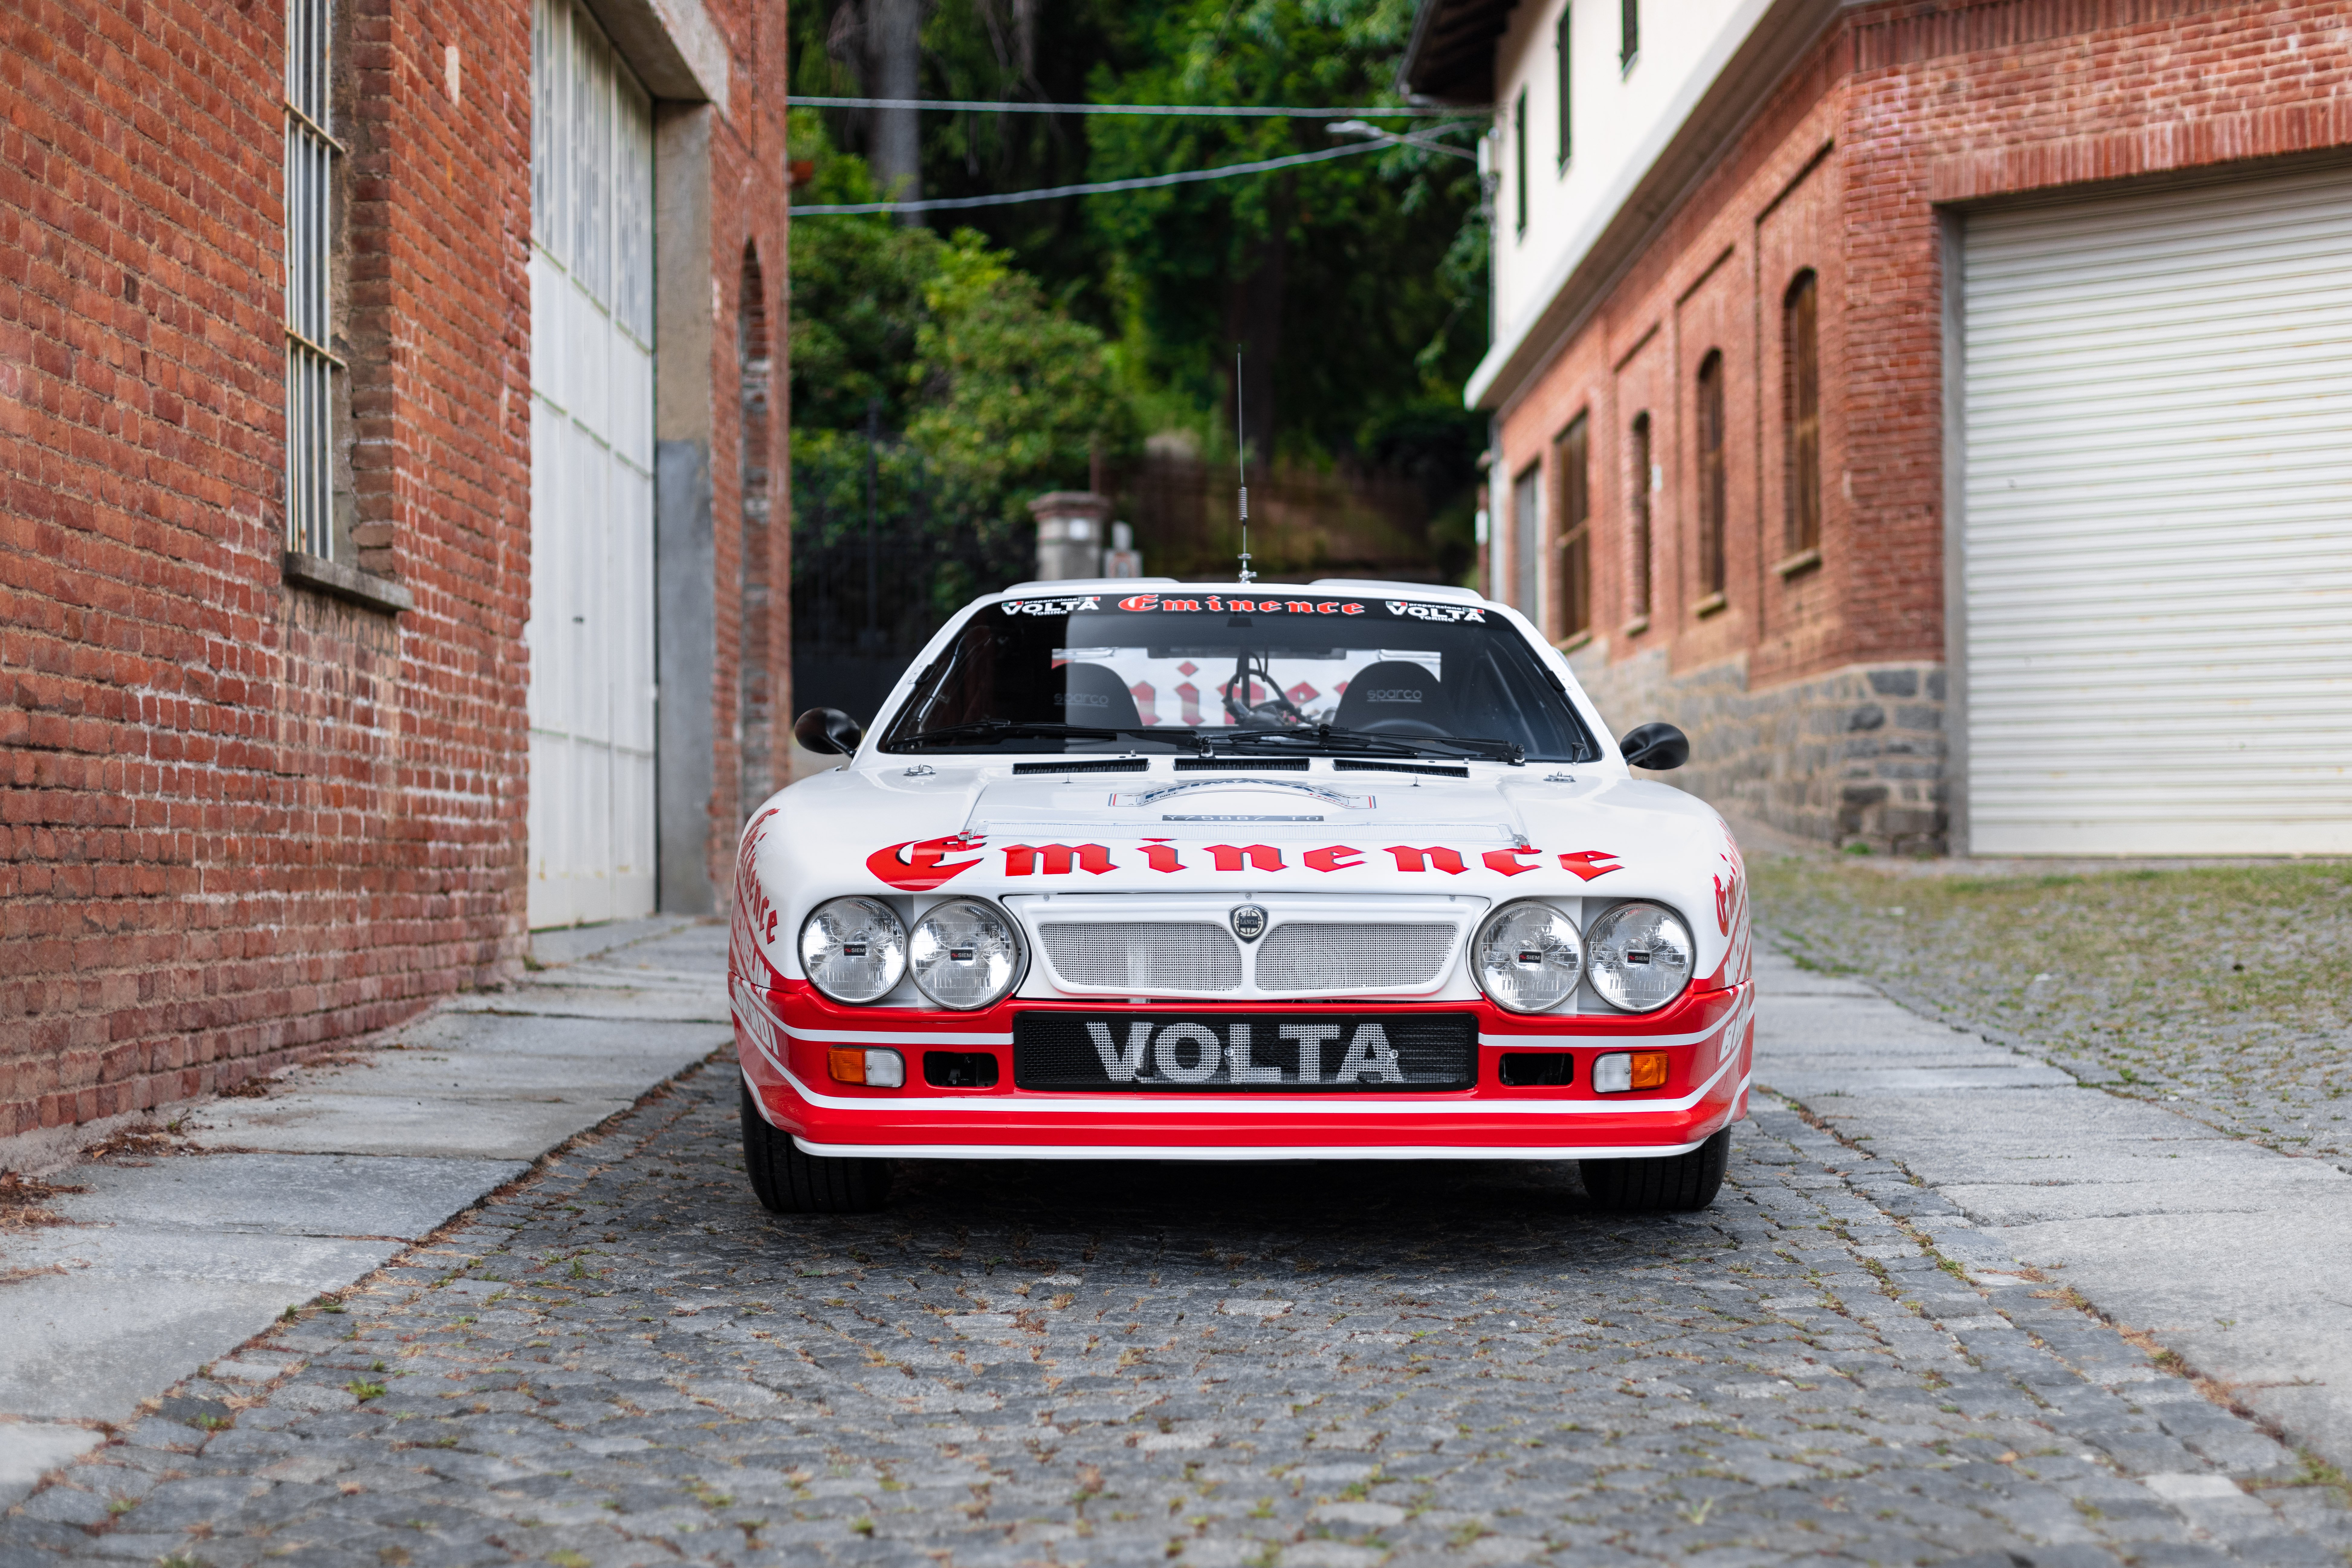 Eminence Front – Volta Lancia 037 returns 37 years after TdF podium